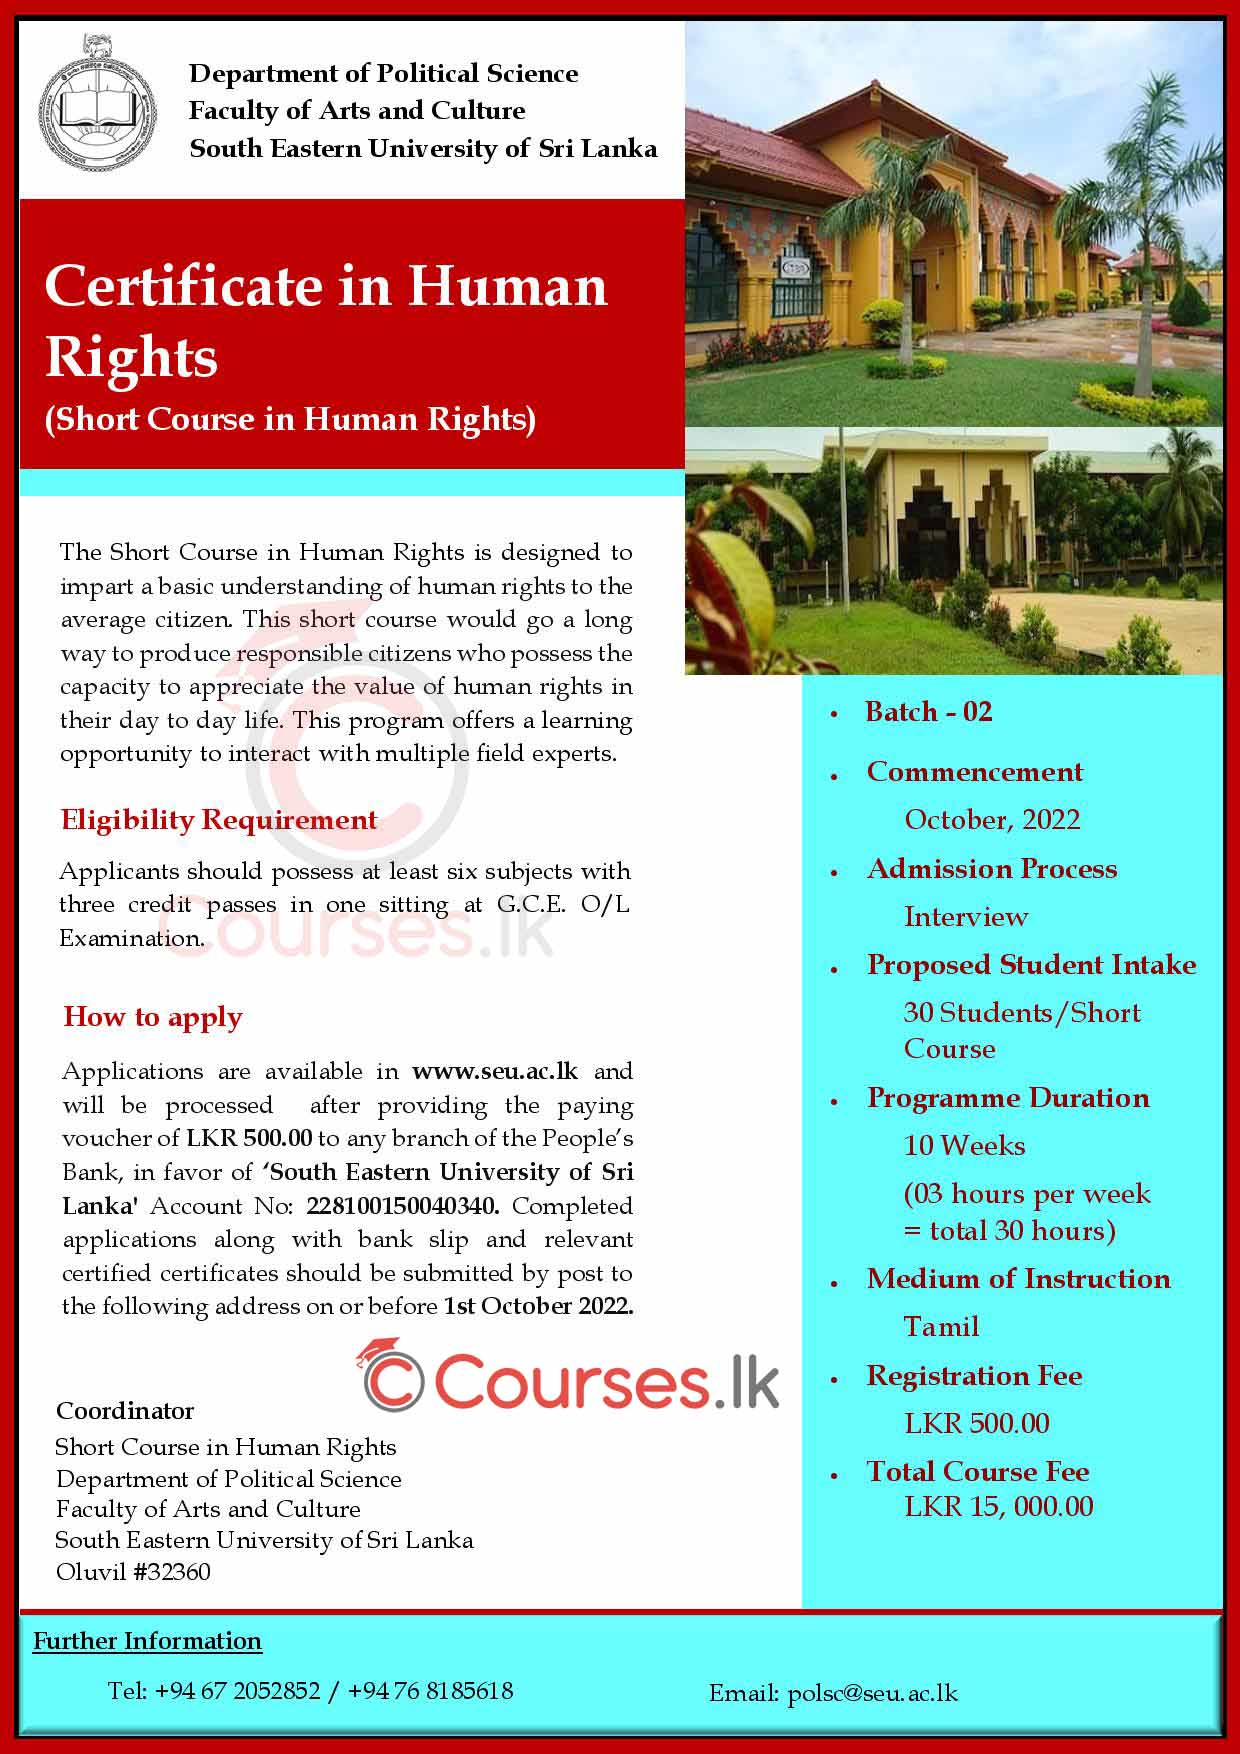 Certificate Course in Human Rights (Short Course) 2022 - South Eastern University of Sri Lanka